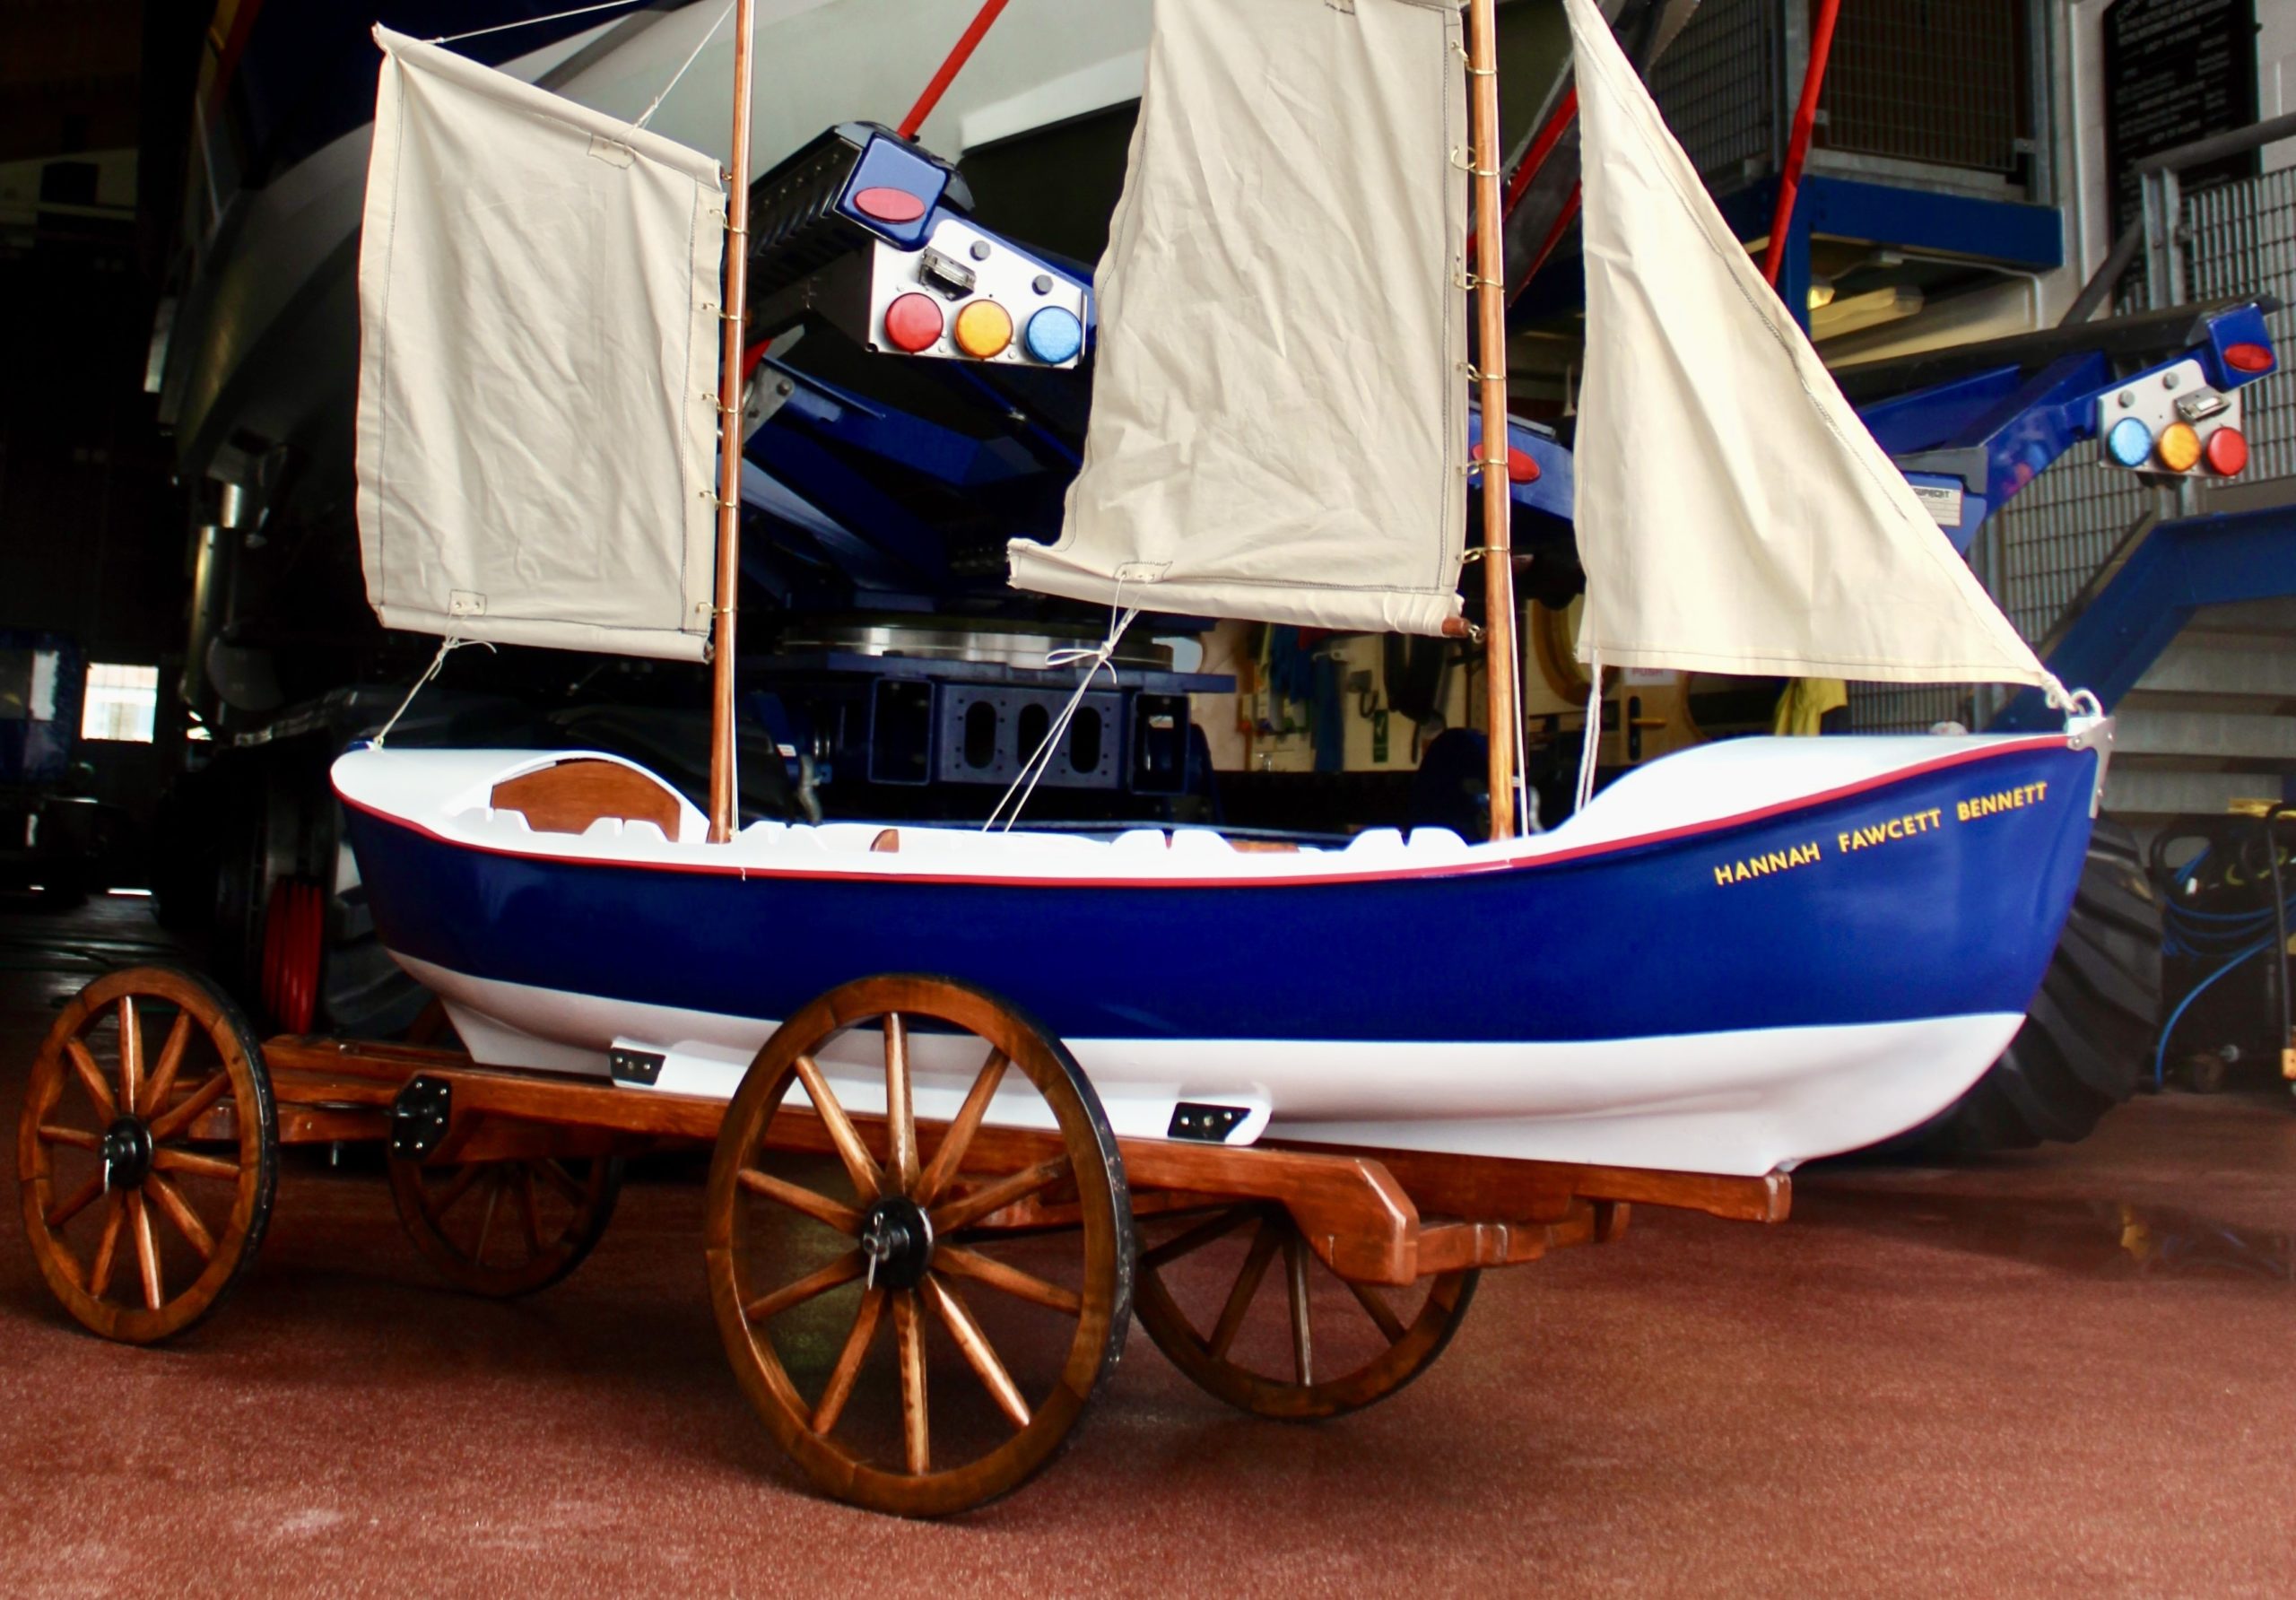 Model of historic lifeboat built to mark 200 years of lifesaving